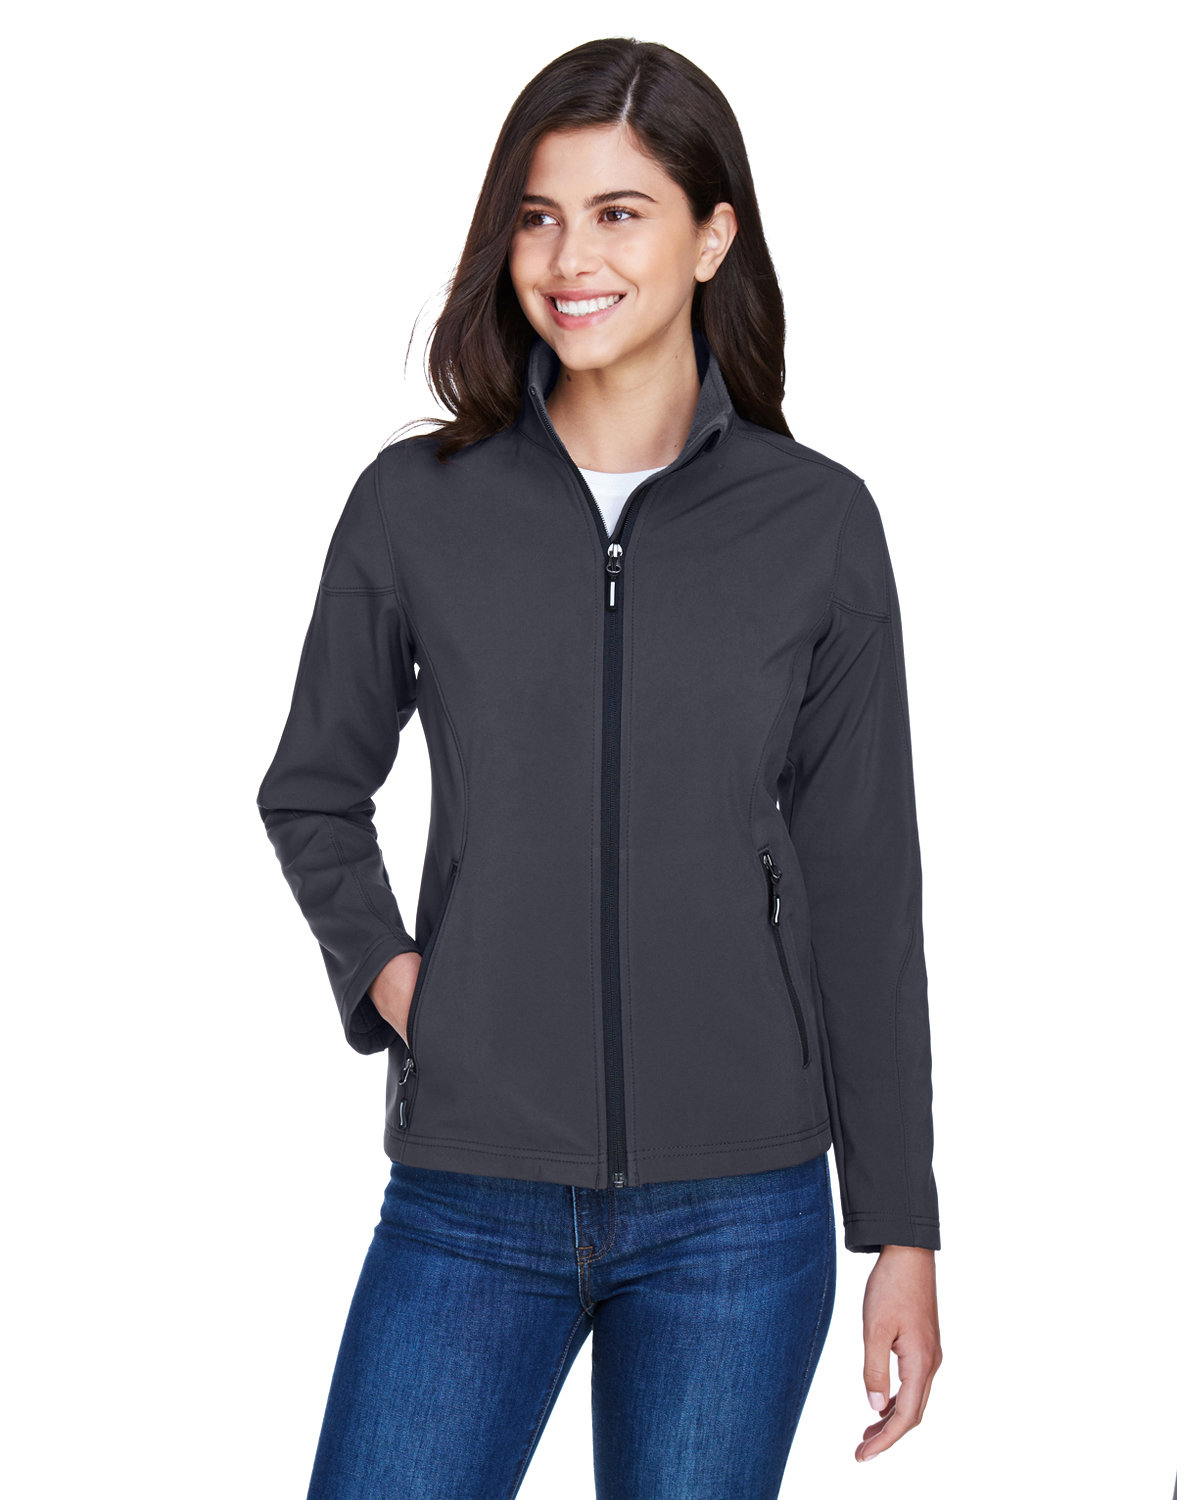 Core 365 Ladies' Cruise Two-Layer Fleece Bonded Soft Shell Jacket CARBON 